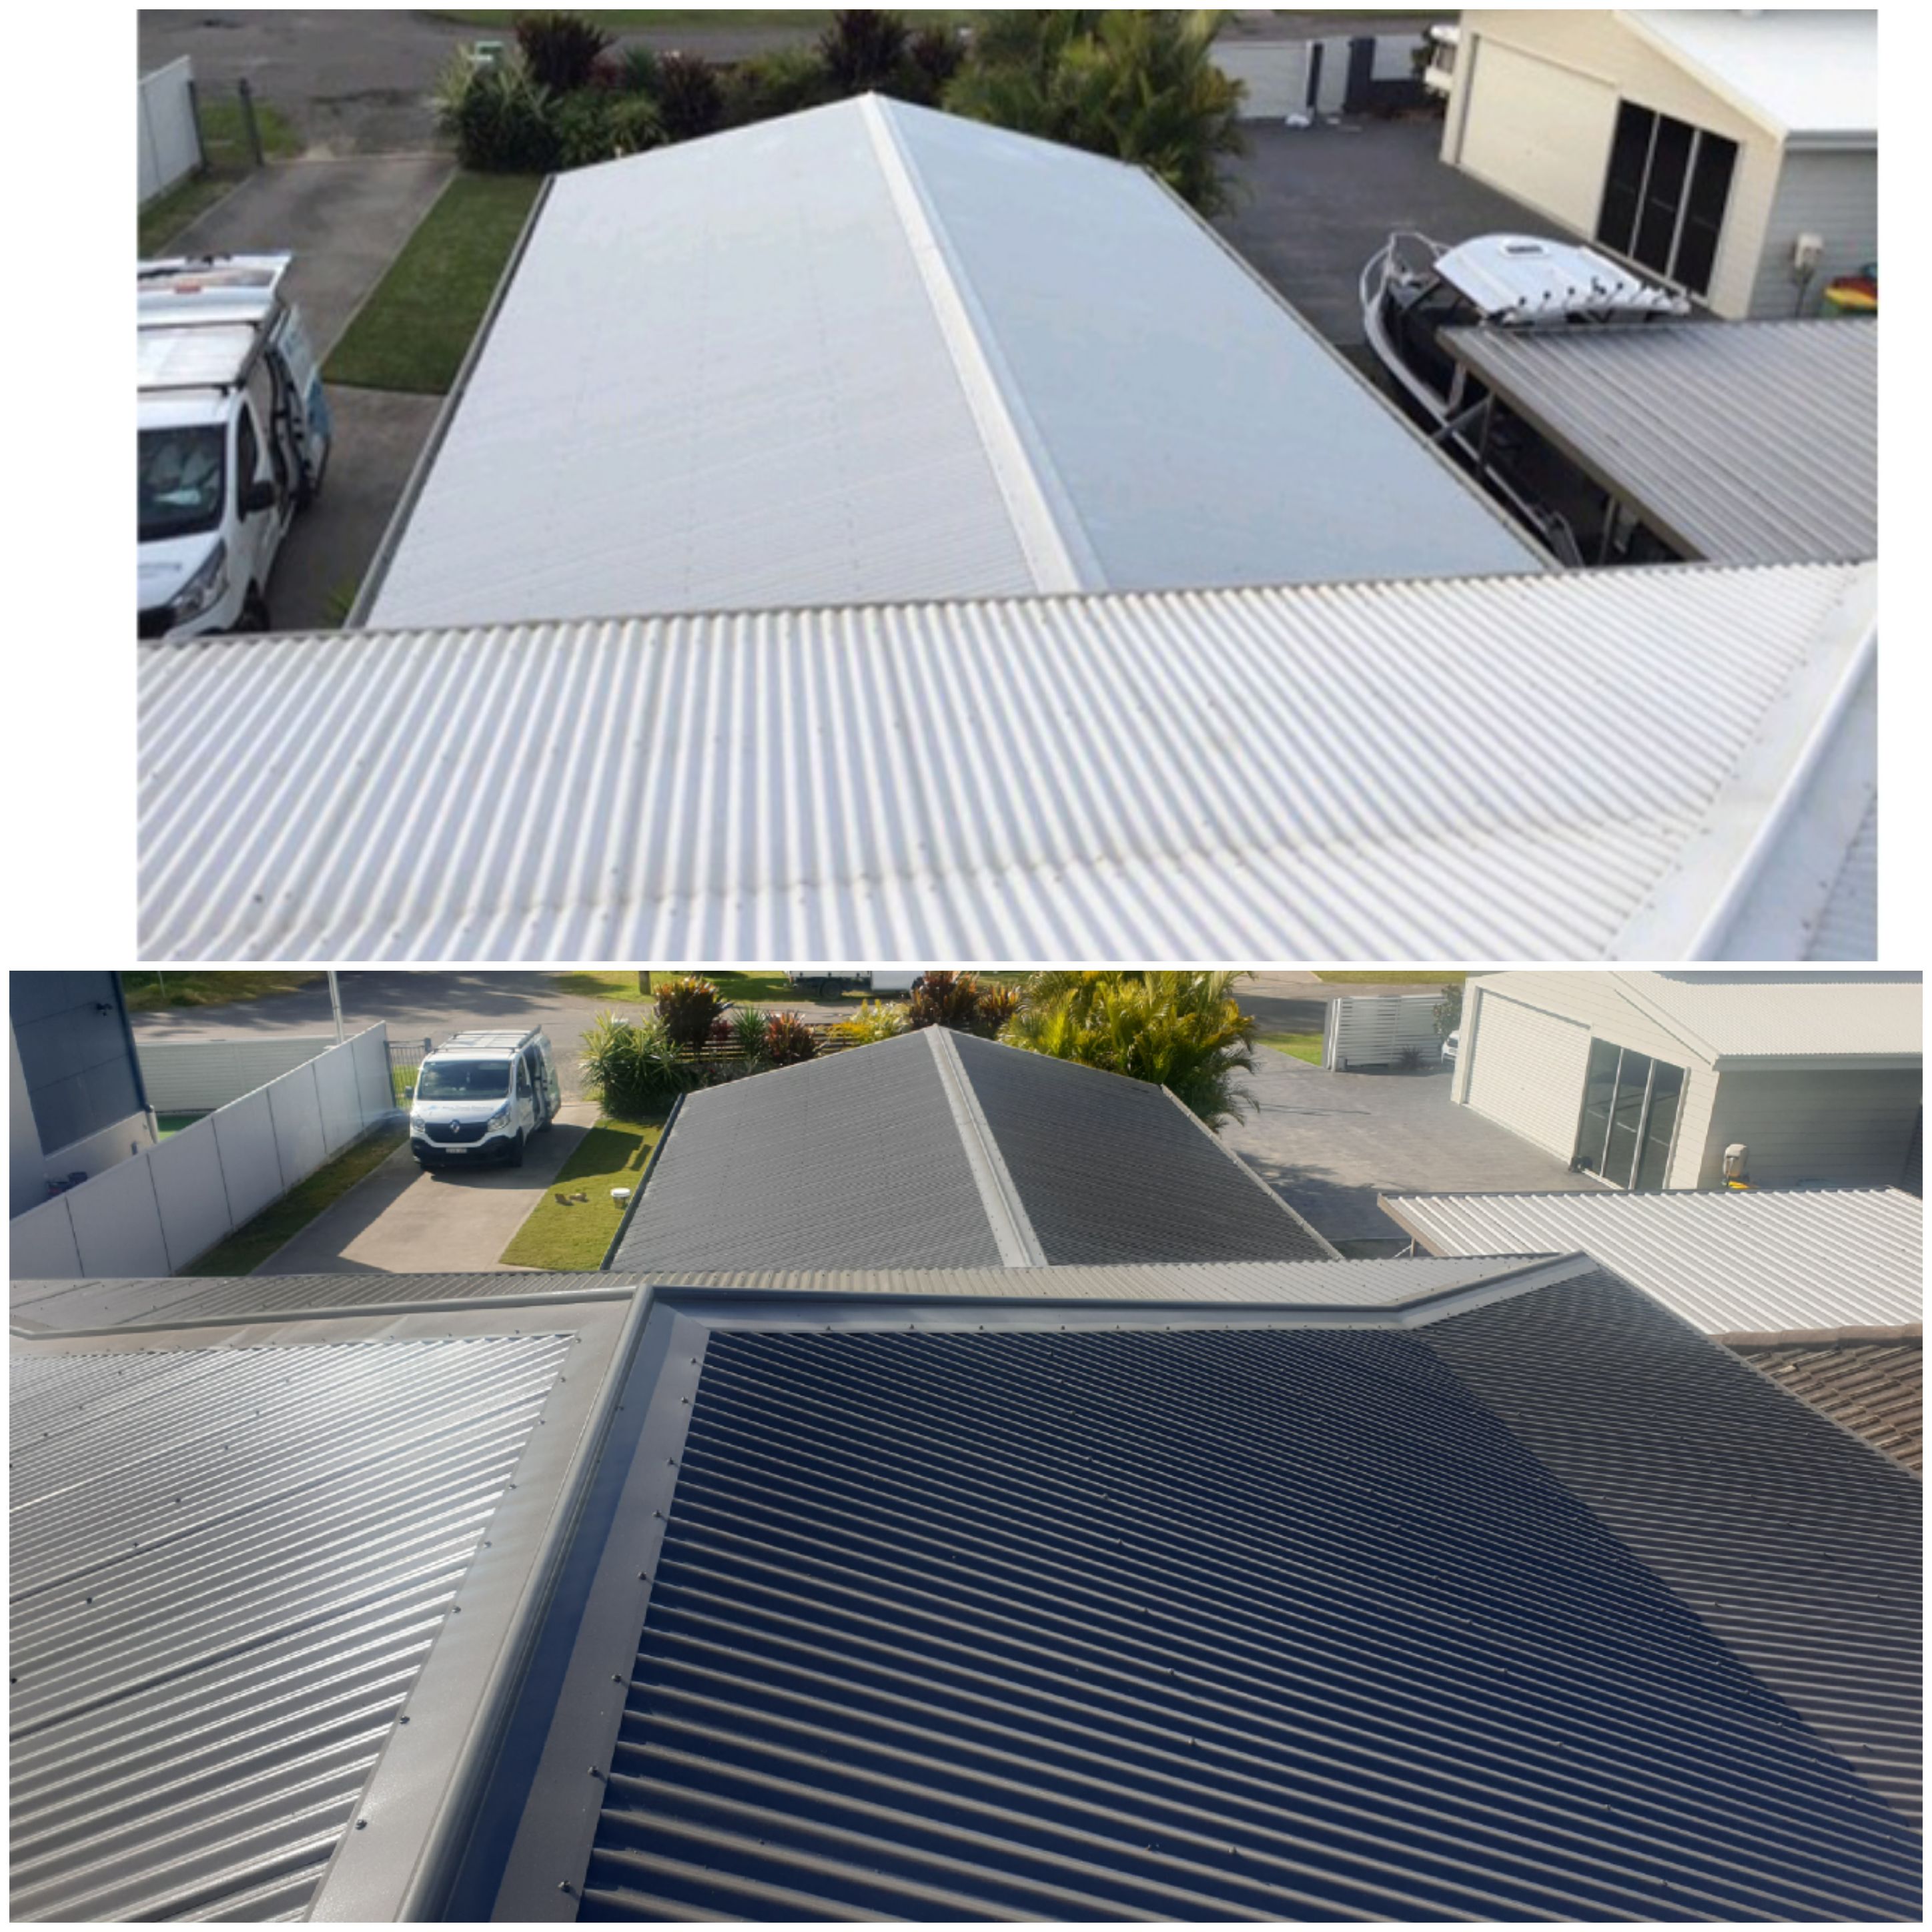 Roof before – after